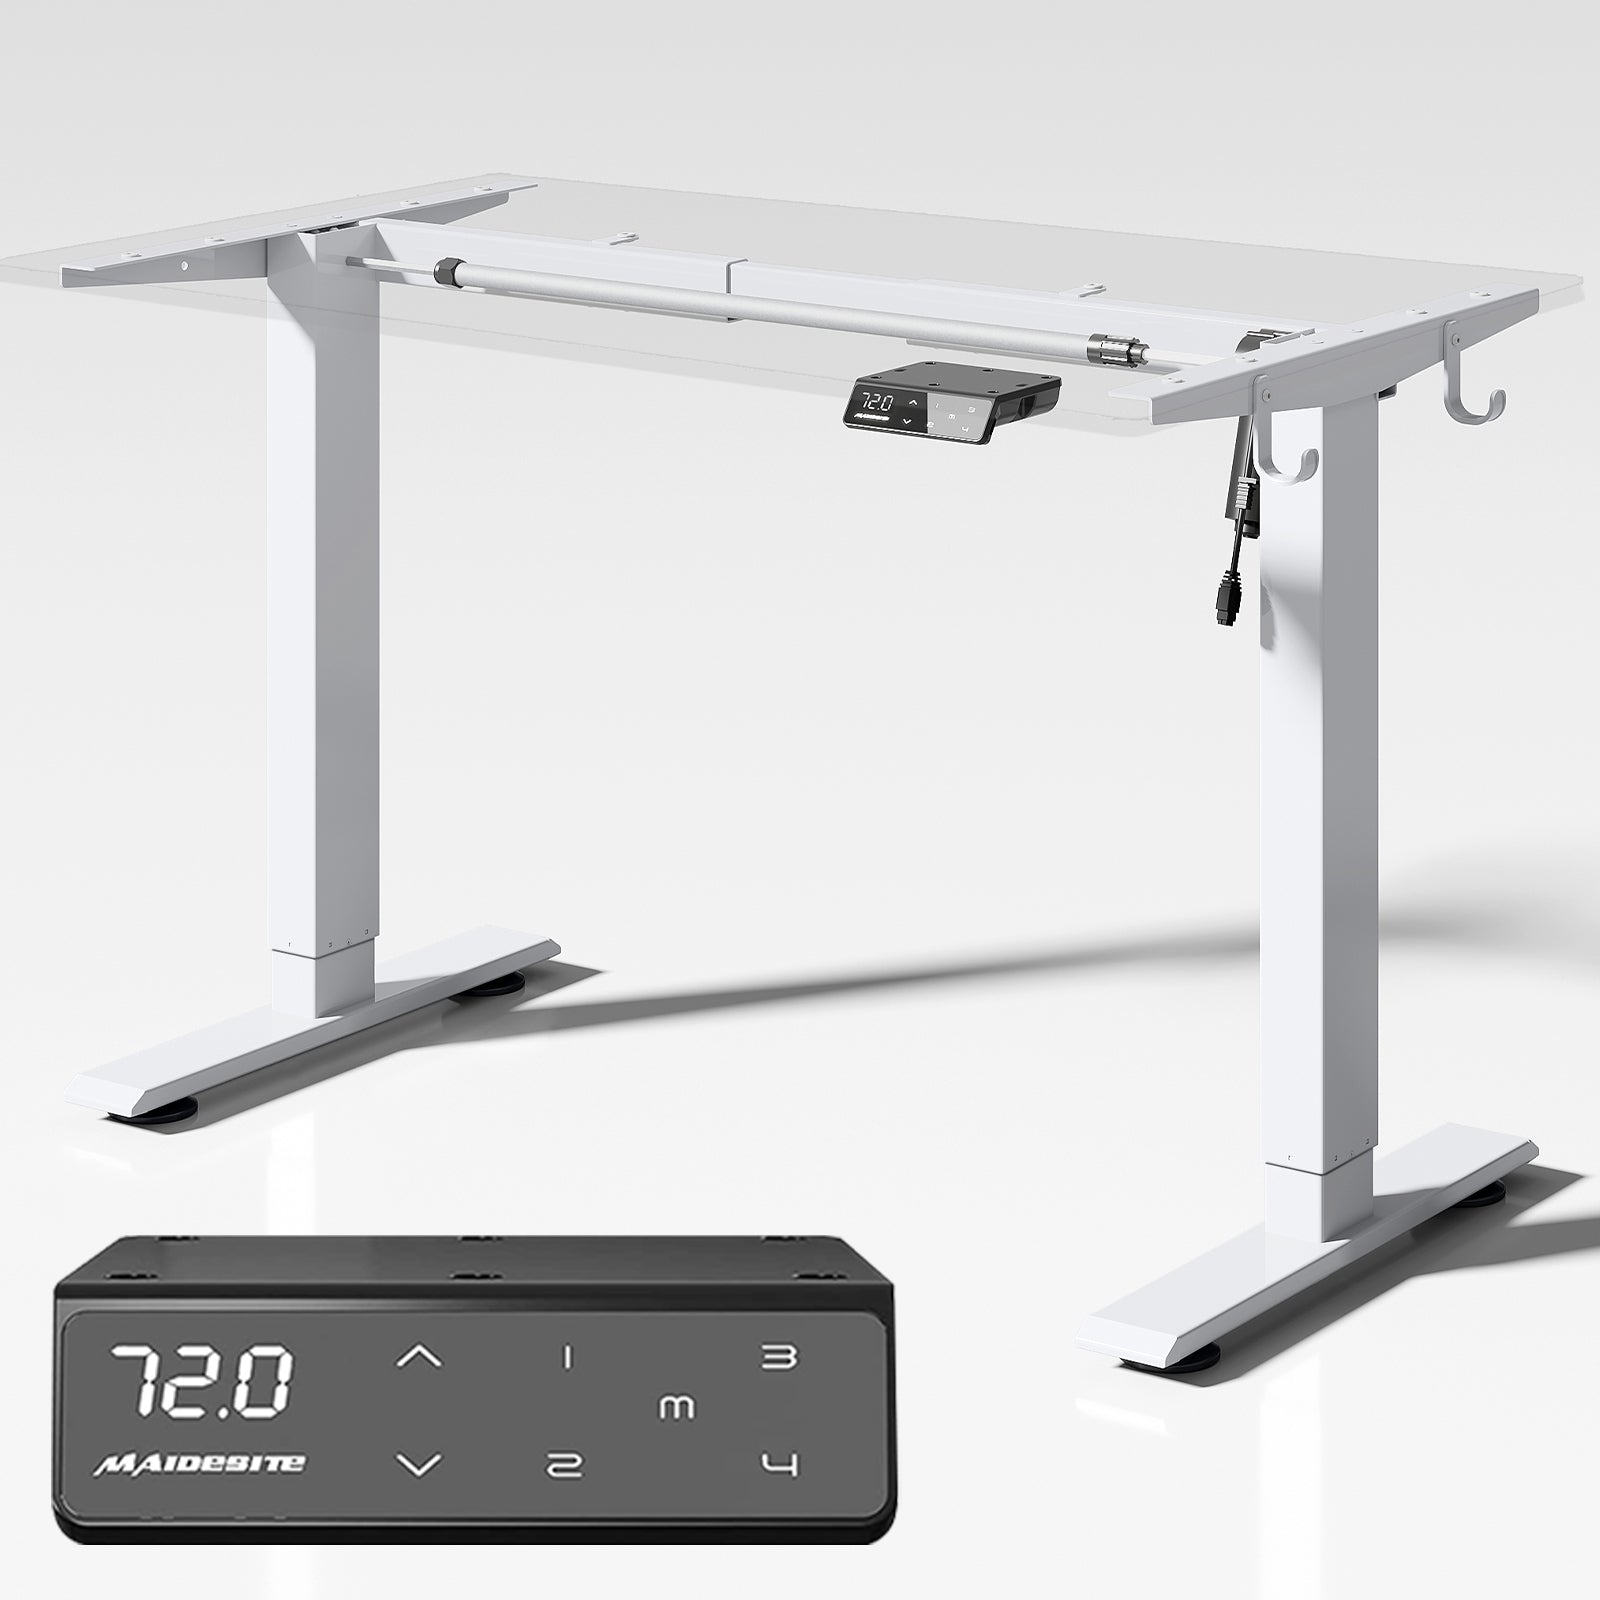 Maidesite T1 Basic - Electric Height-Adjustable Standing Desk White Frame